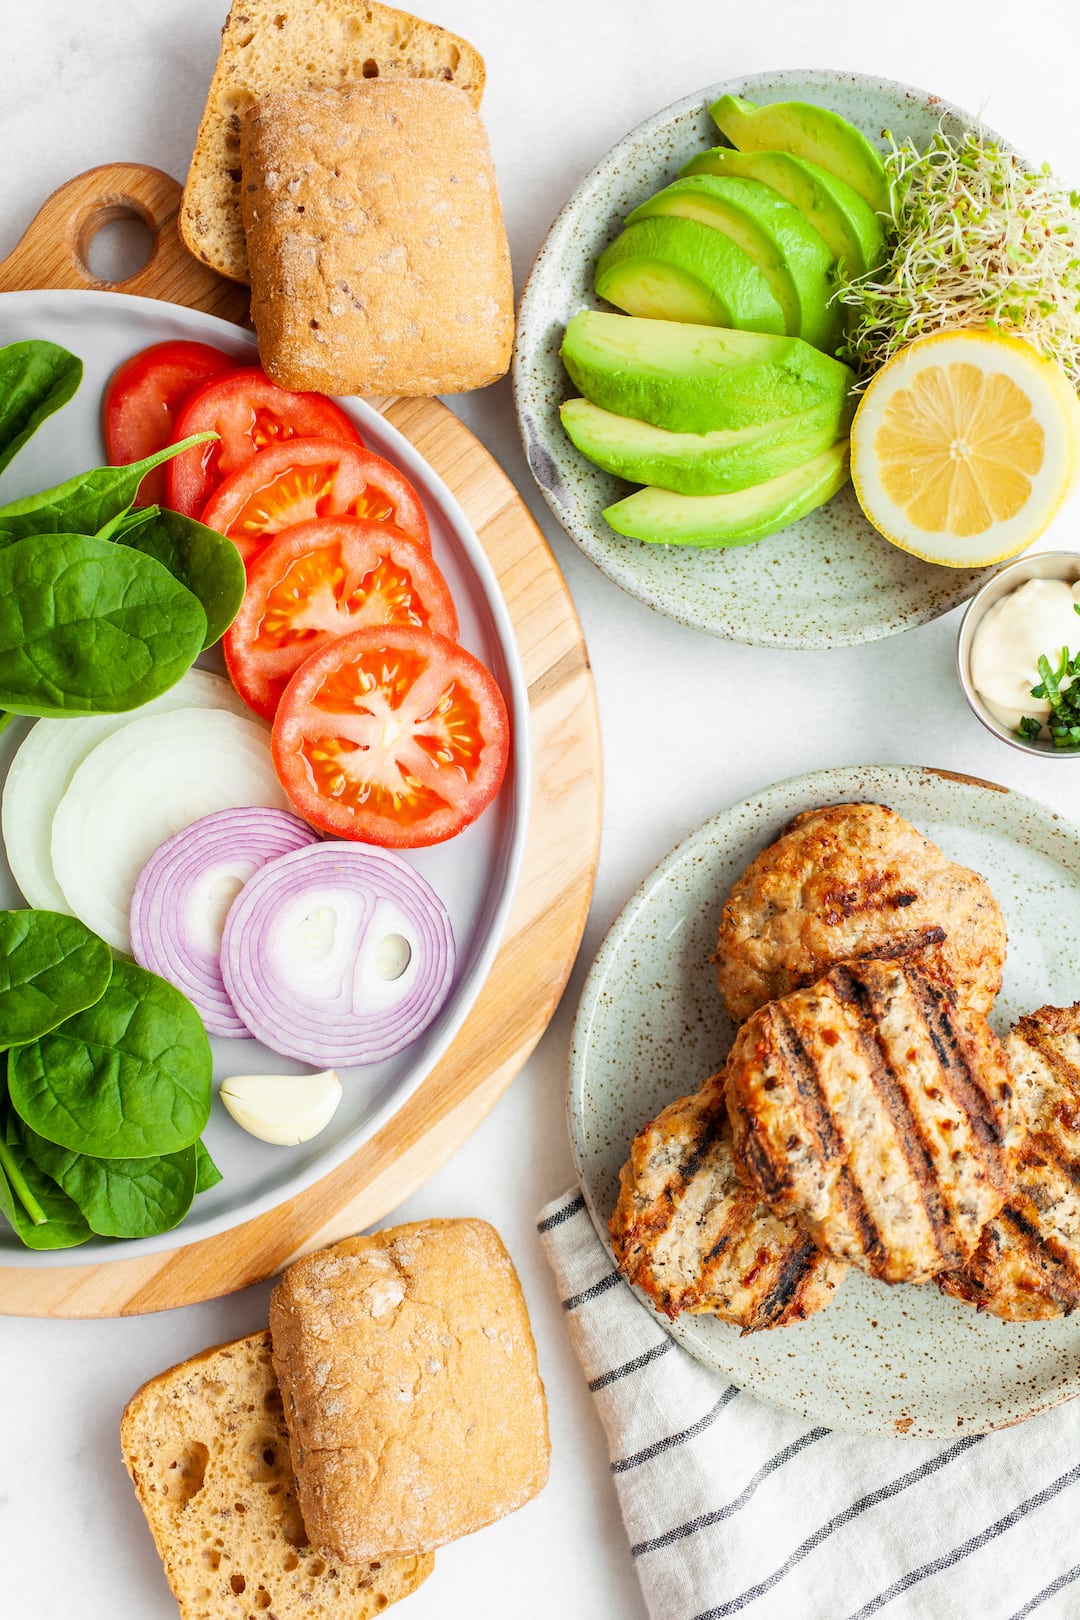 How To Make - Best Healthy Turkey Burger Recipe with Avocado